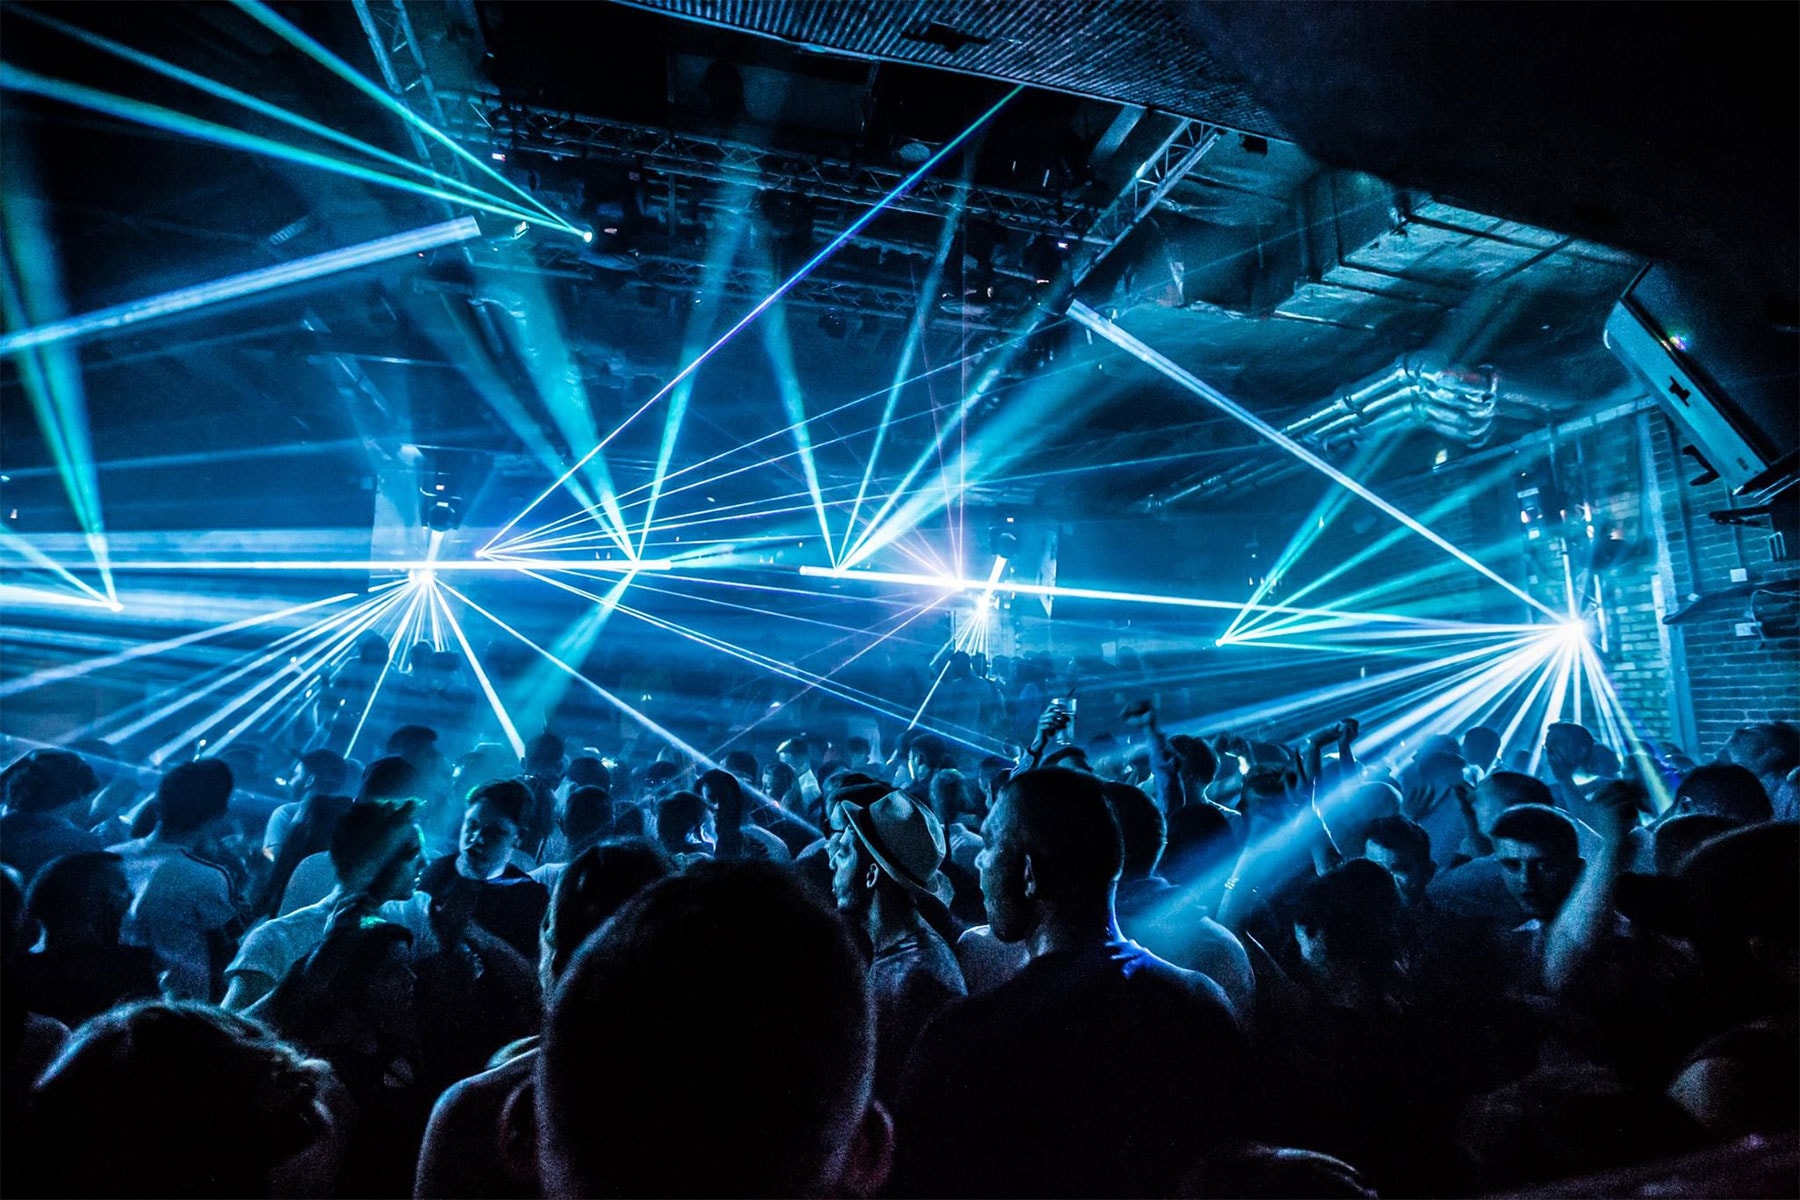 fabric London is Reopening